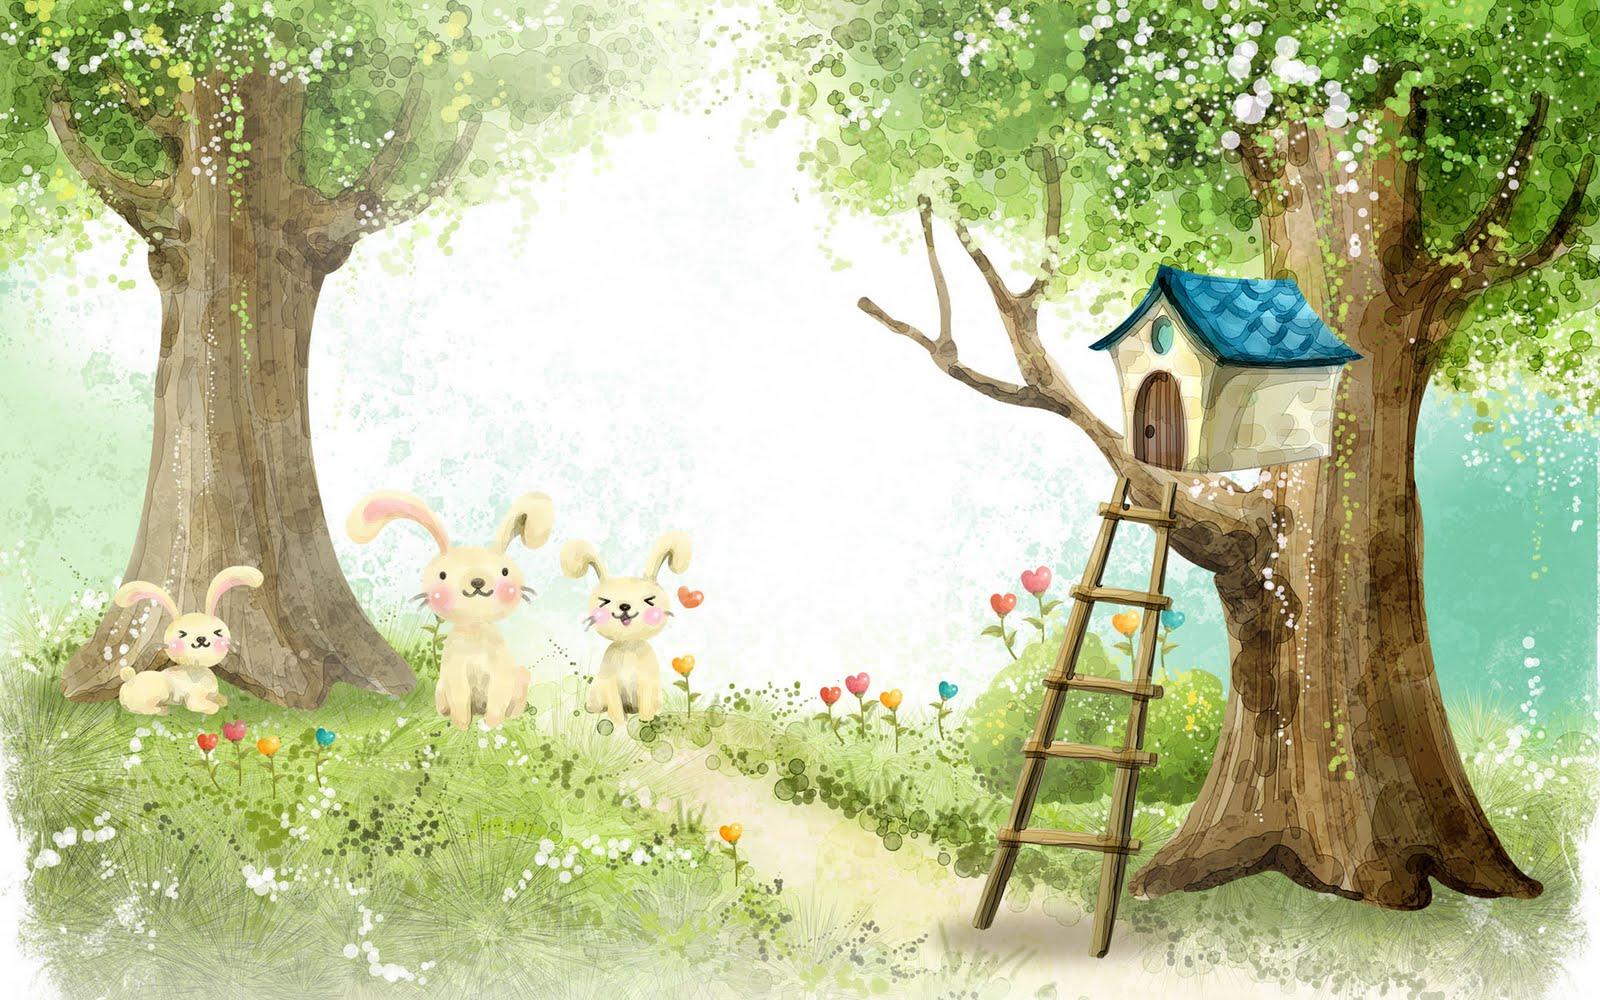 Treehouse Wallpaper (Picture)